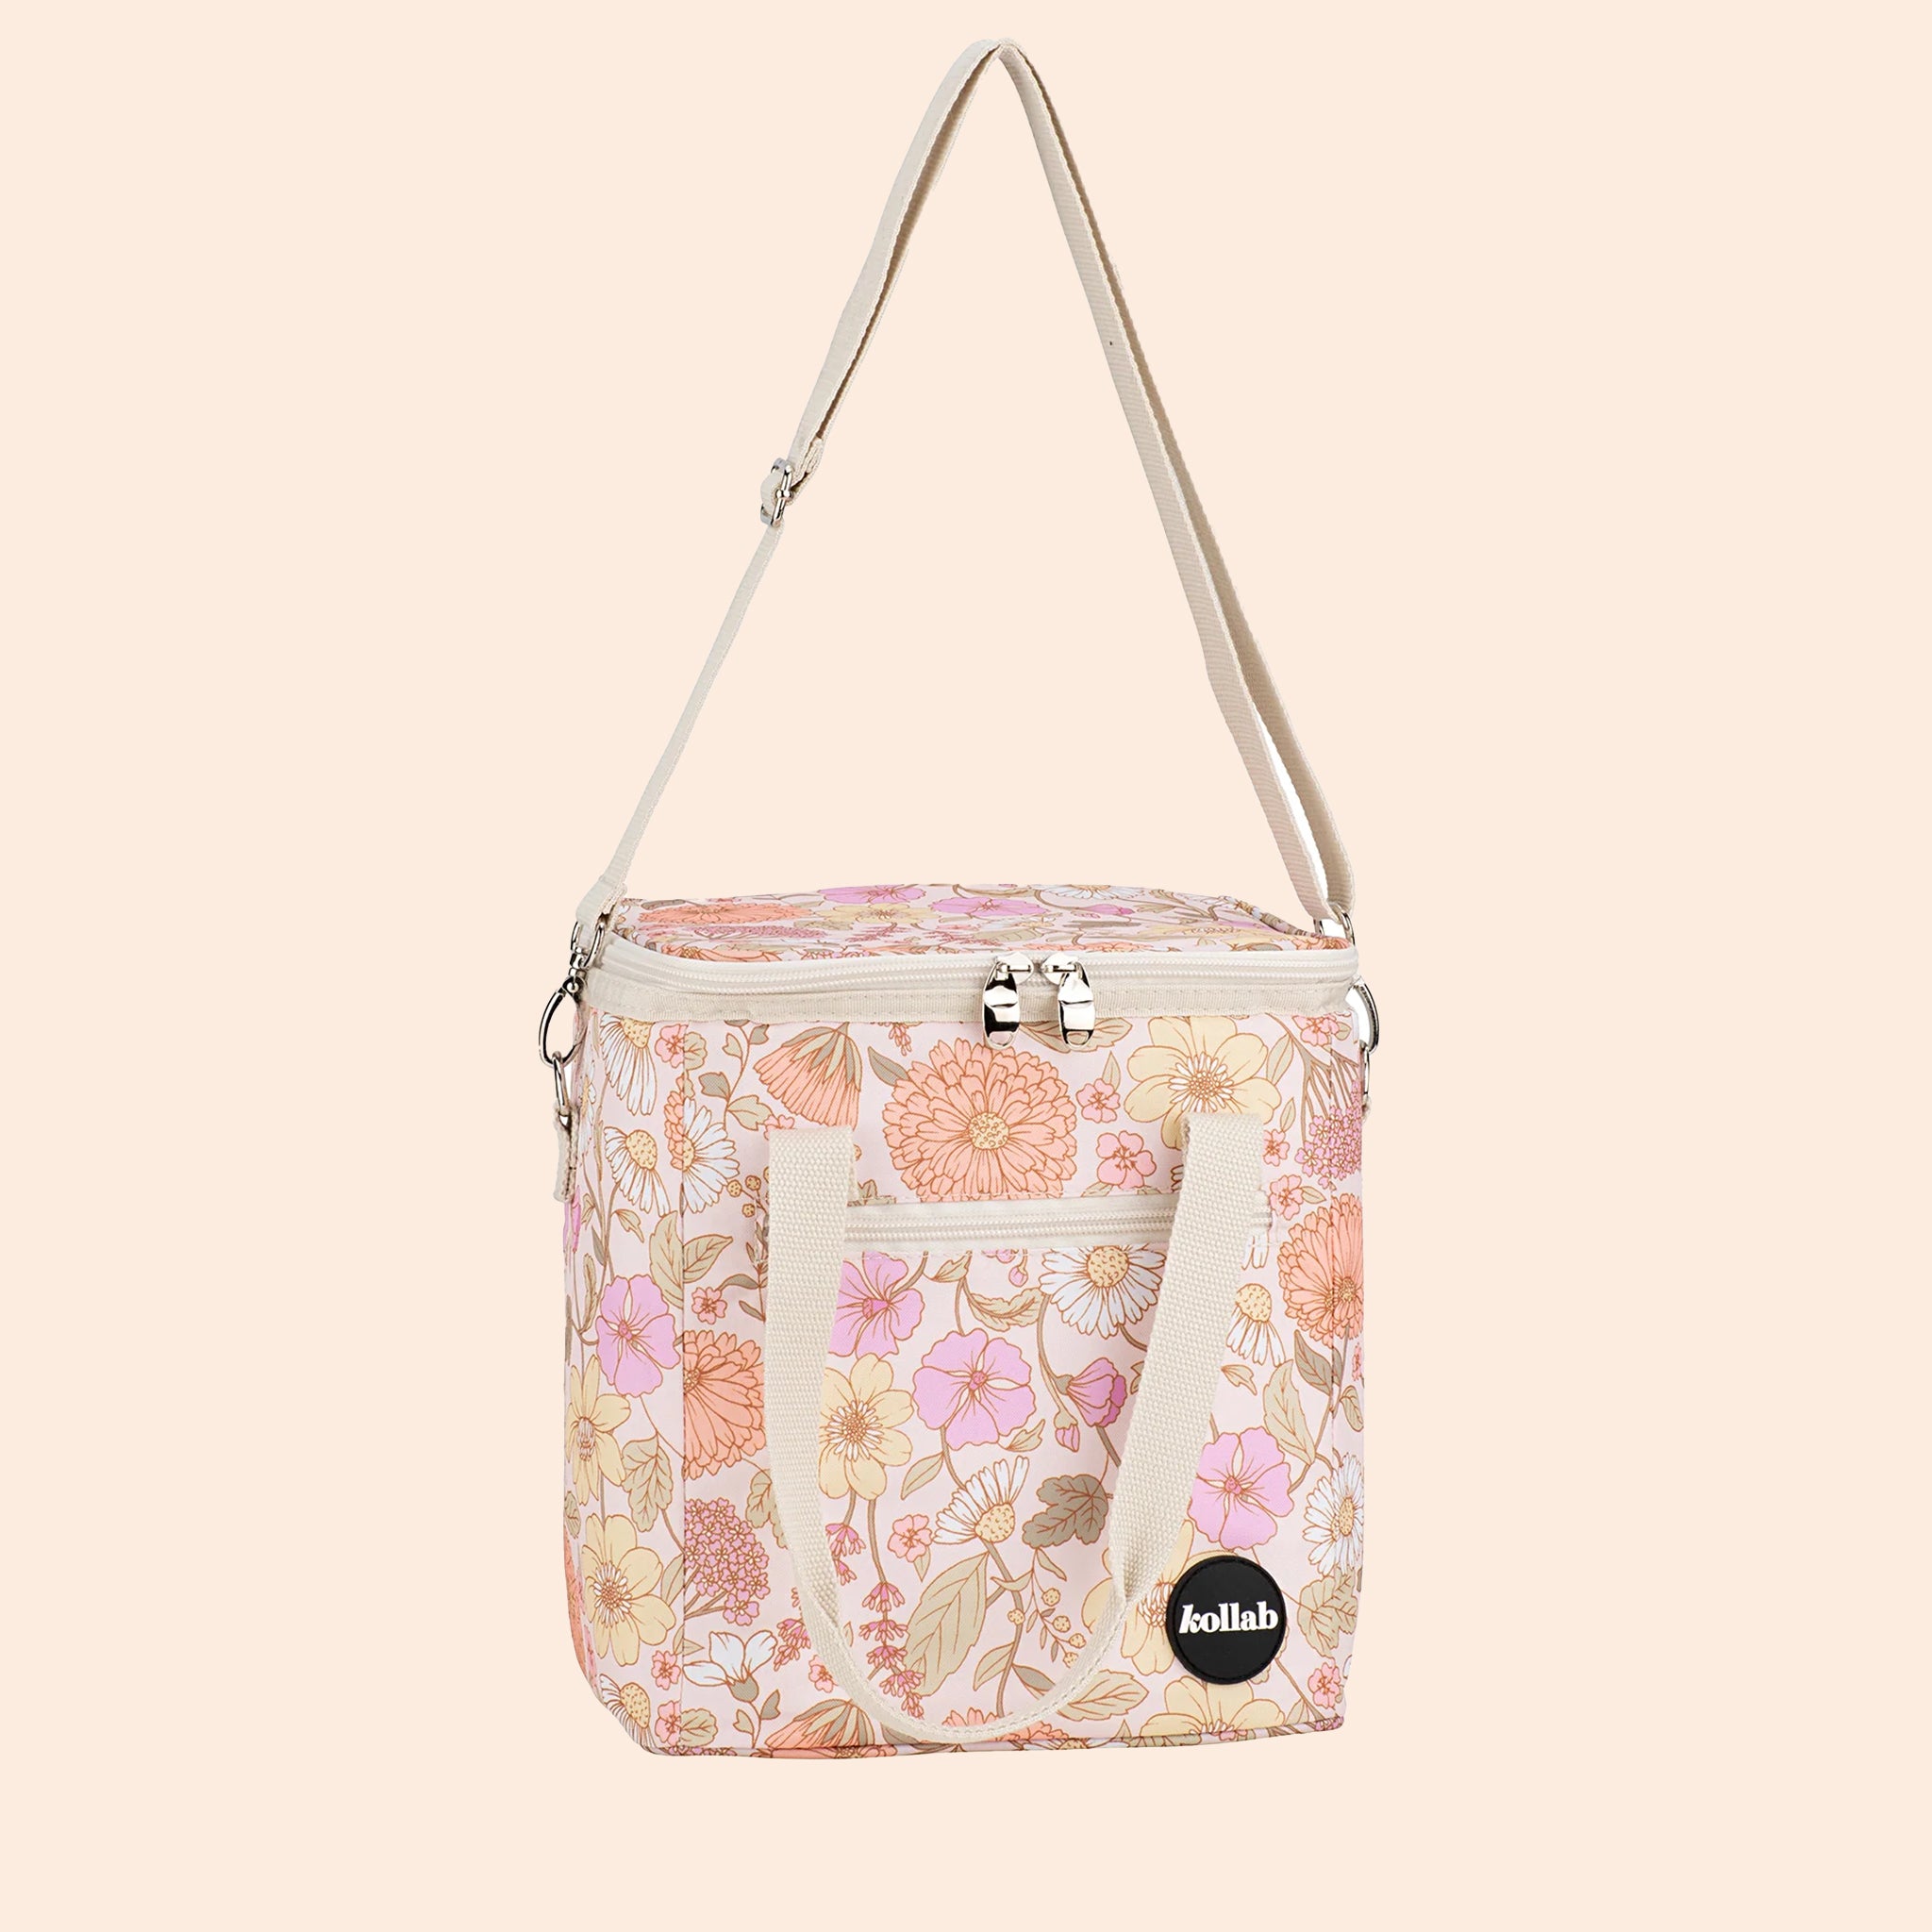 A pink and yellow muted floral printed cooler bag with a strap.